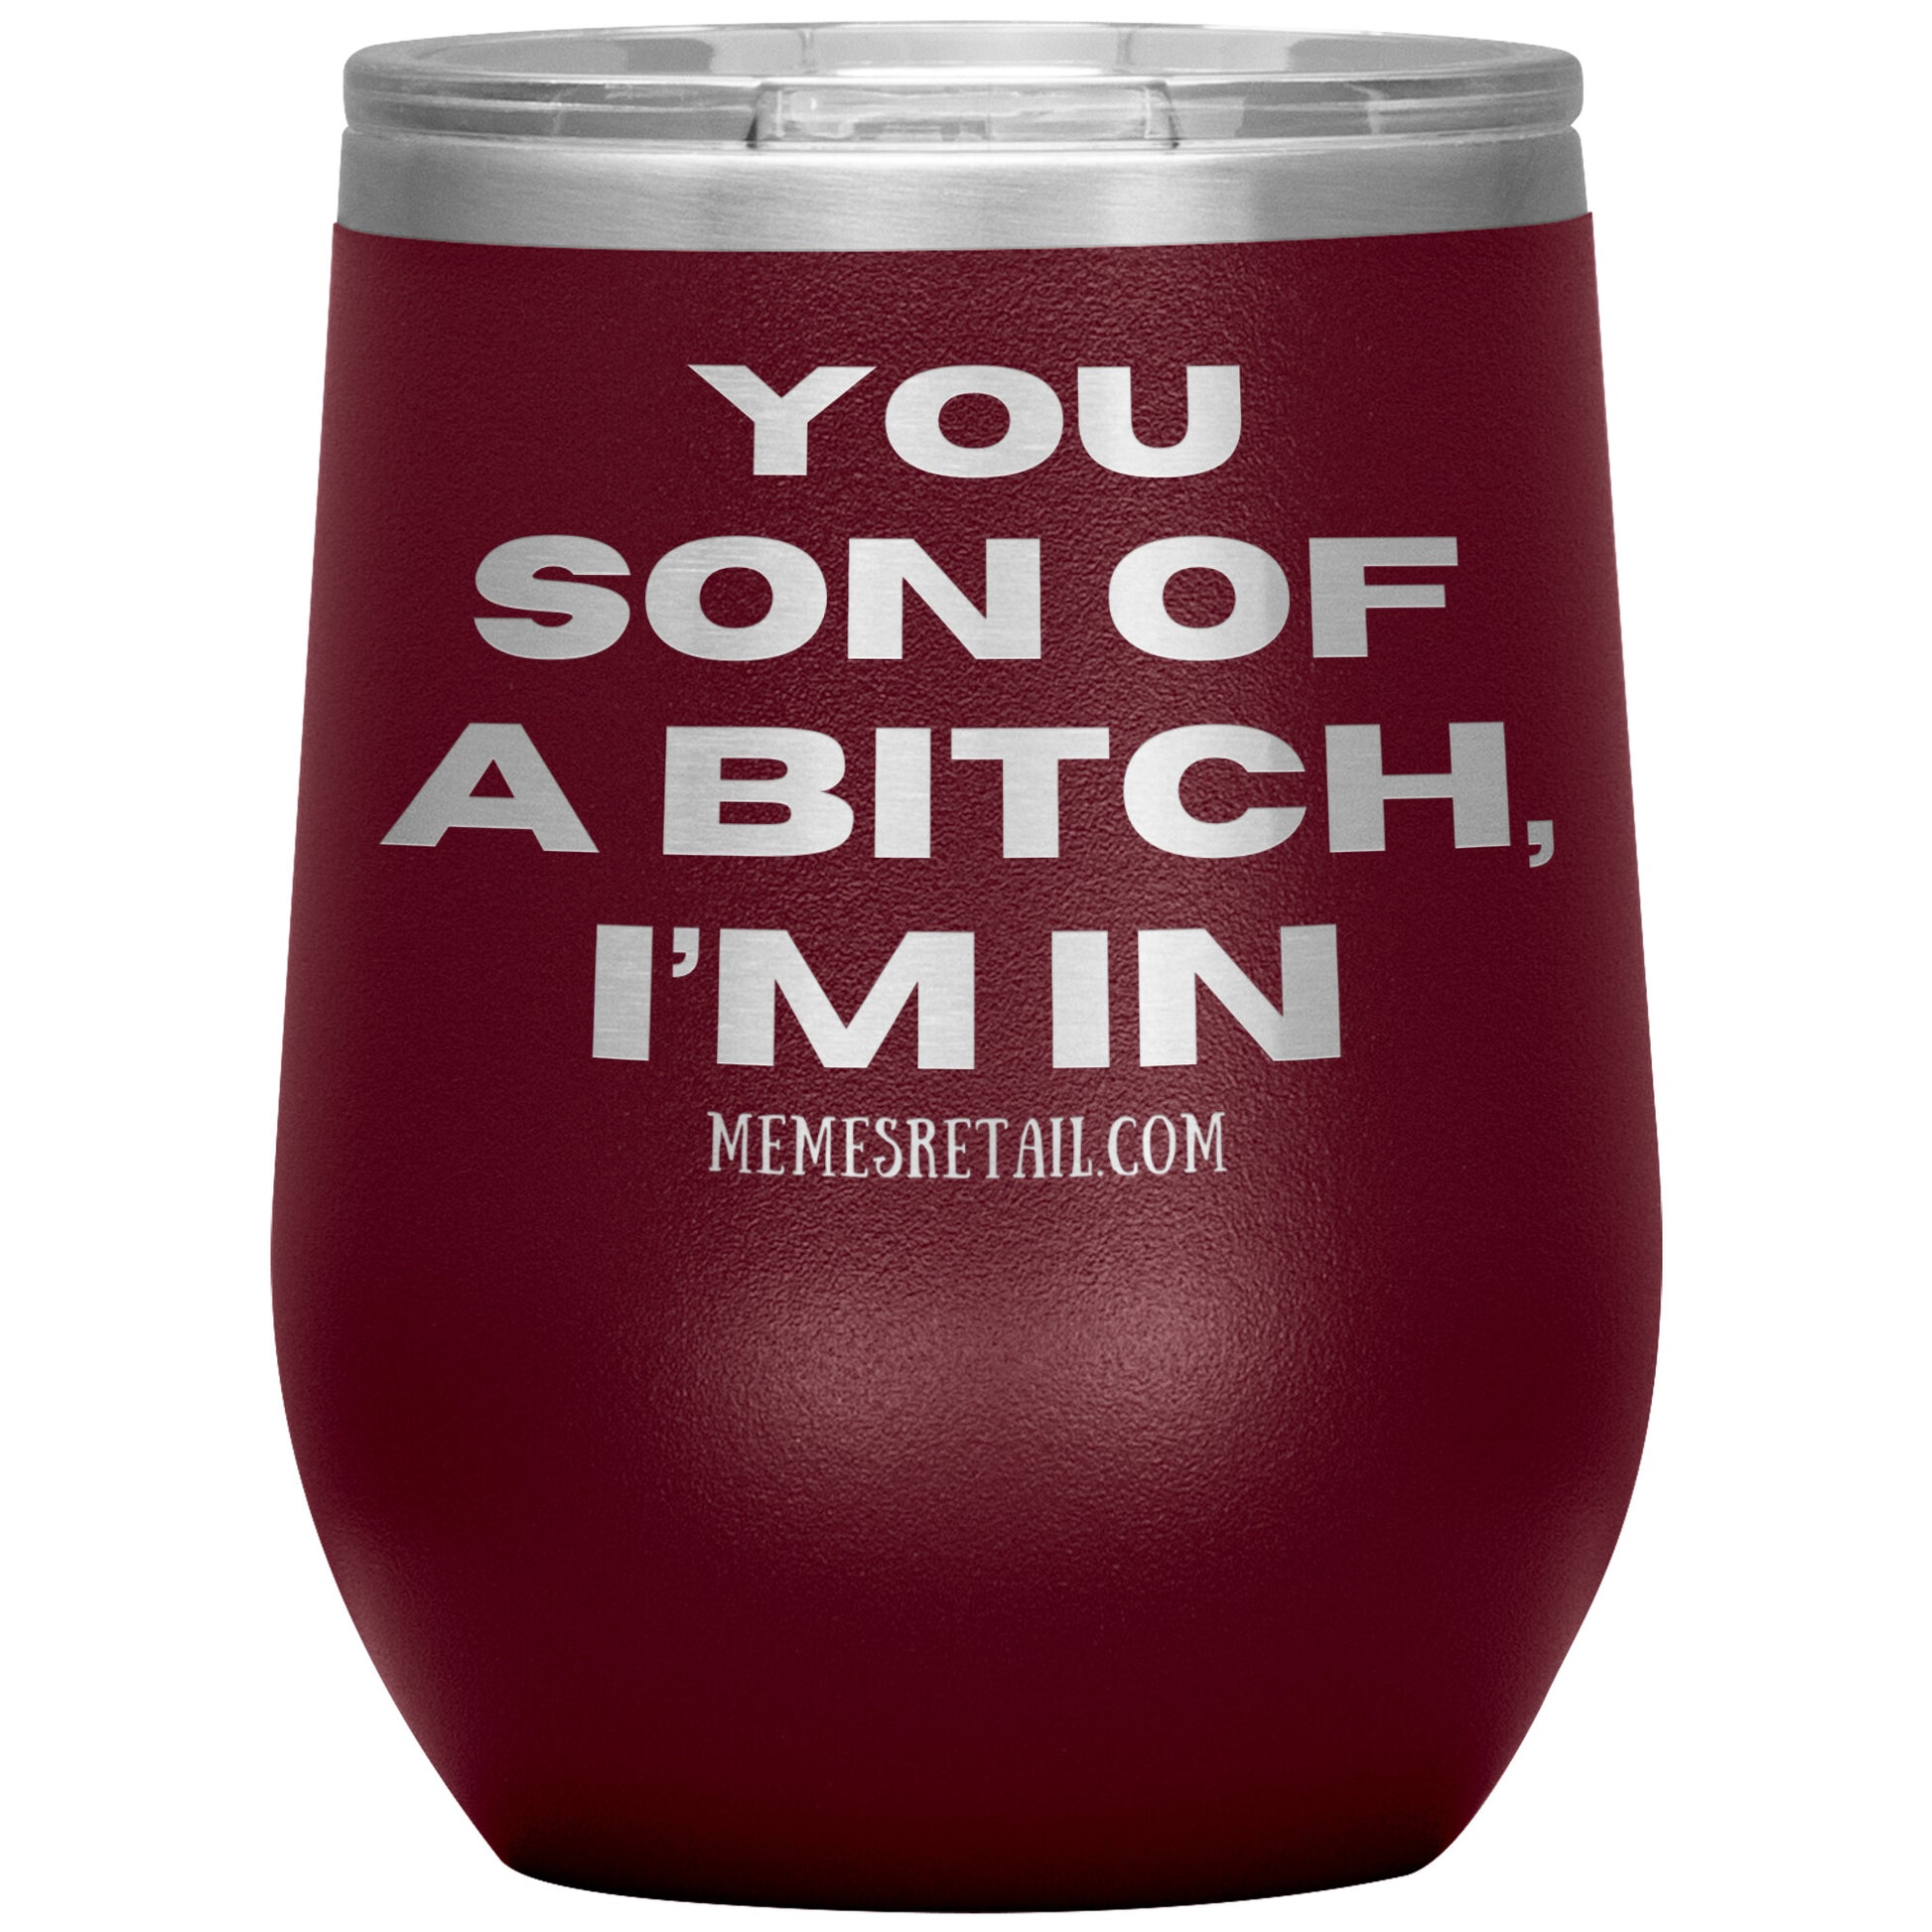 You son of a bitch, I’m in Tumblers, 12oz Wine Insulated Tumbler / Maroon - MemesRetail.com